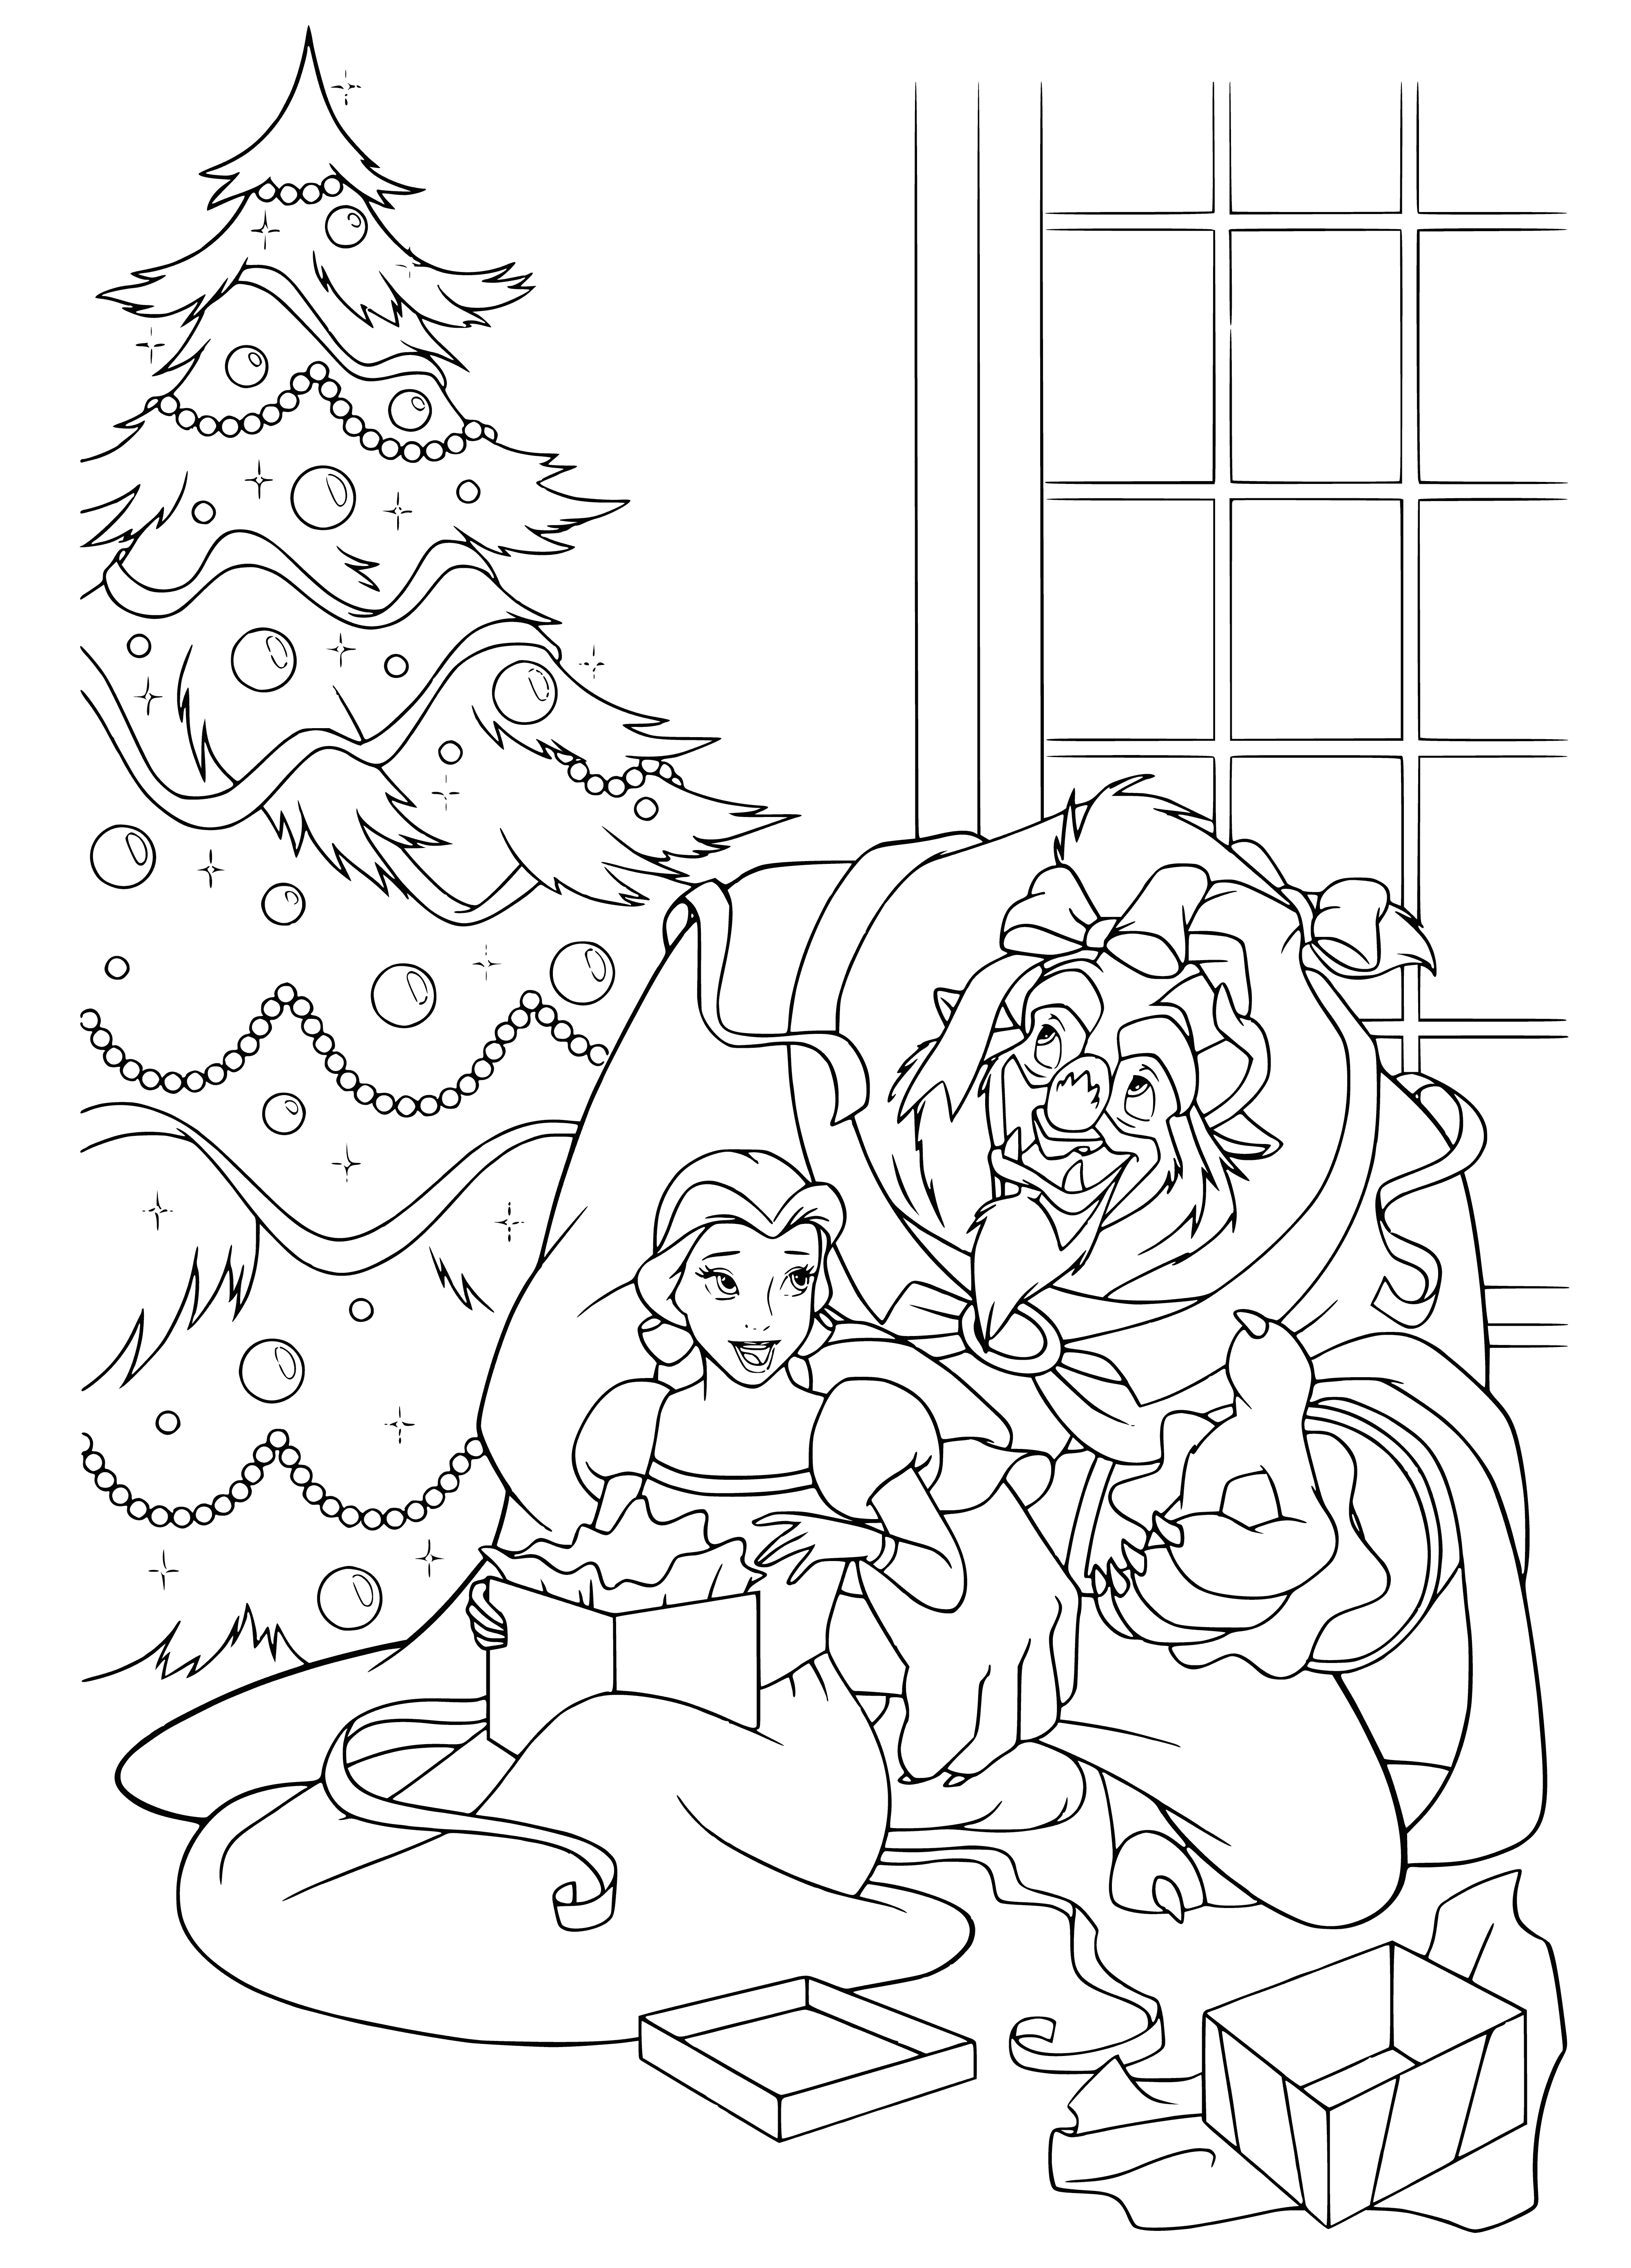 coloring page: Belle happily awaits gifts, sitting in a chair with a cheerful expression, ready to open her presents.